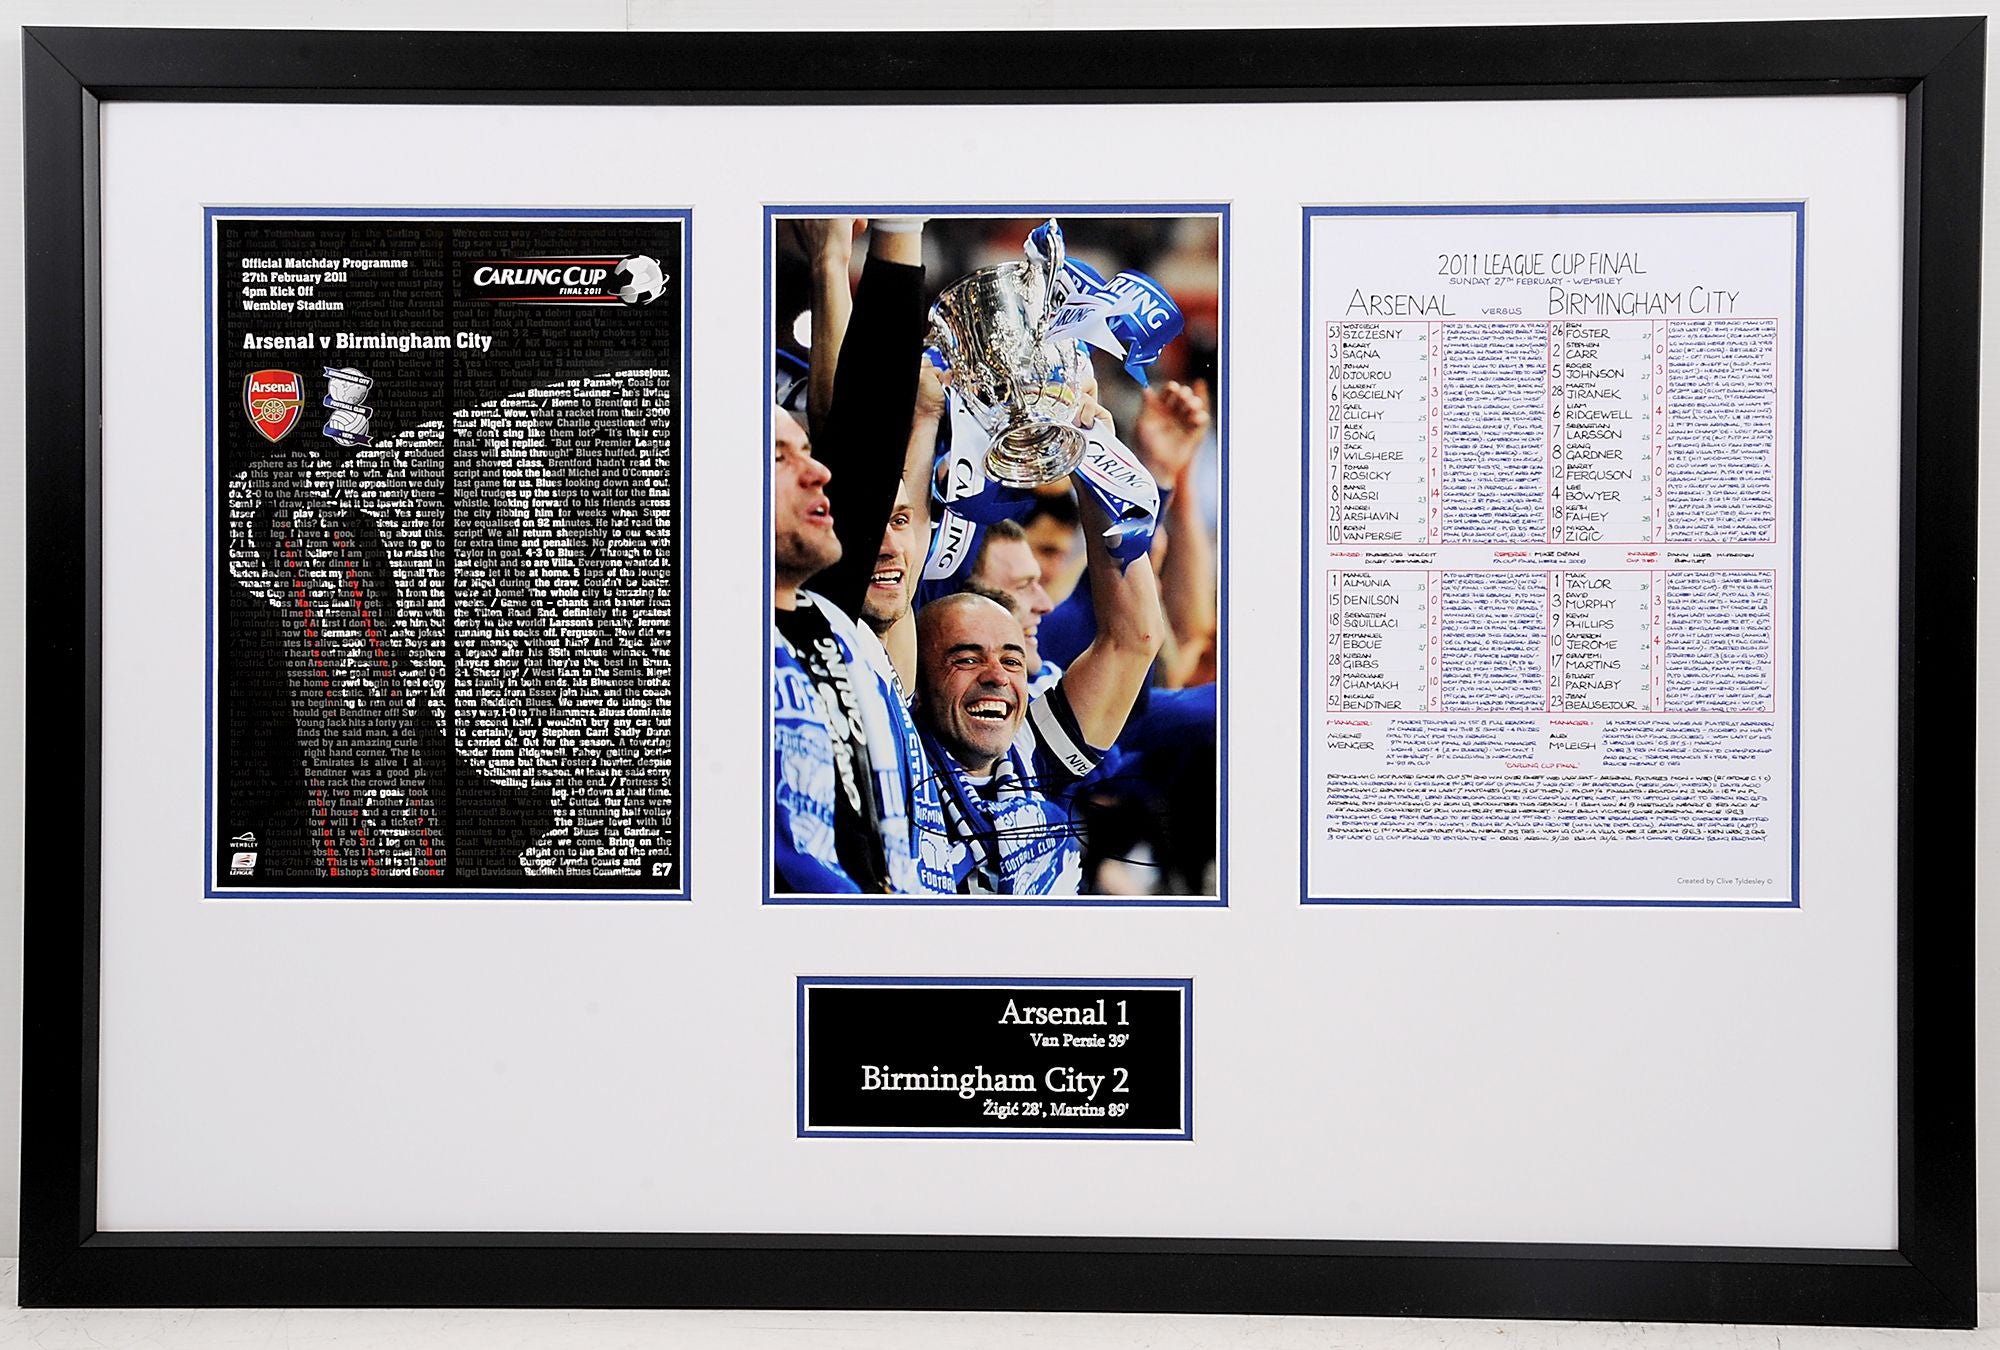 Stephen Carr Signed Frame with Clive Tyldsley Pre Match Notes